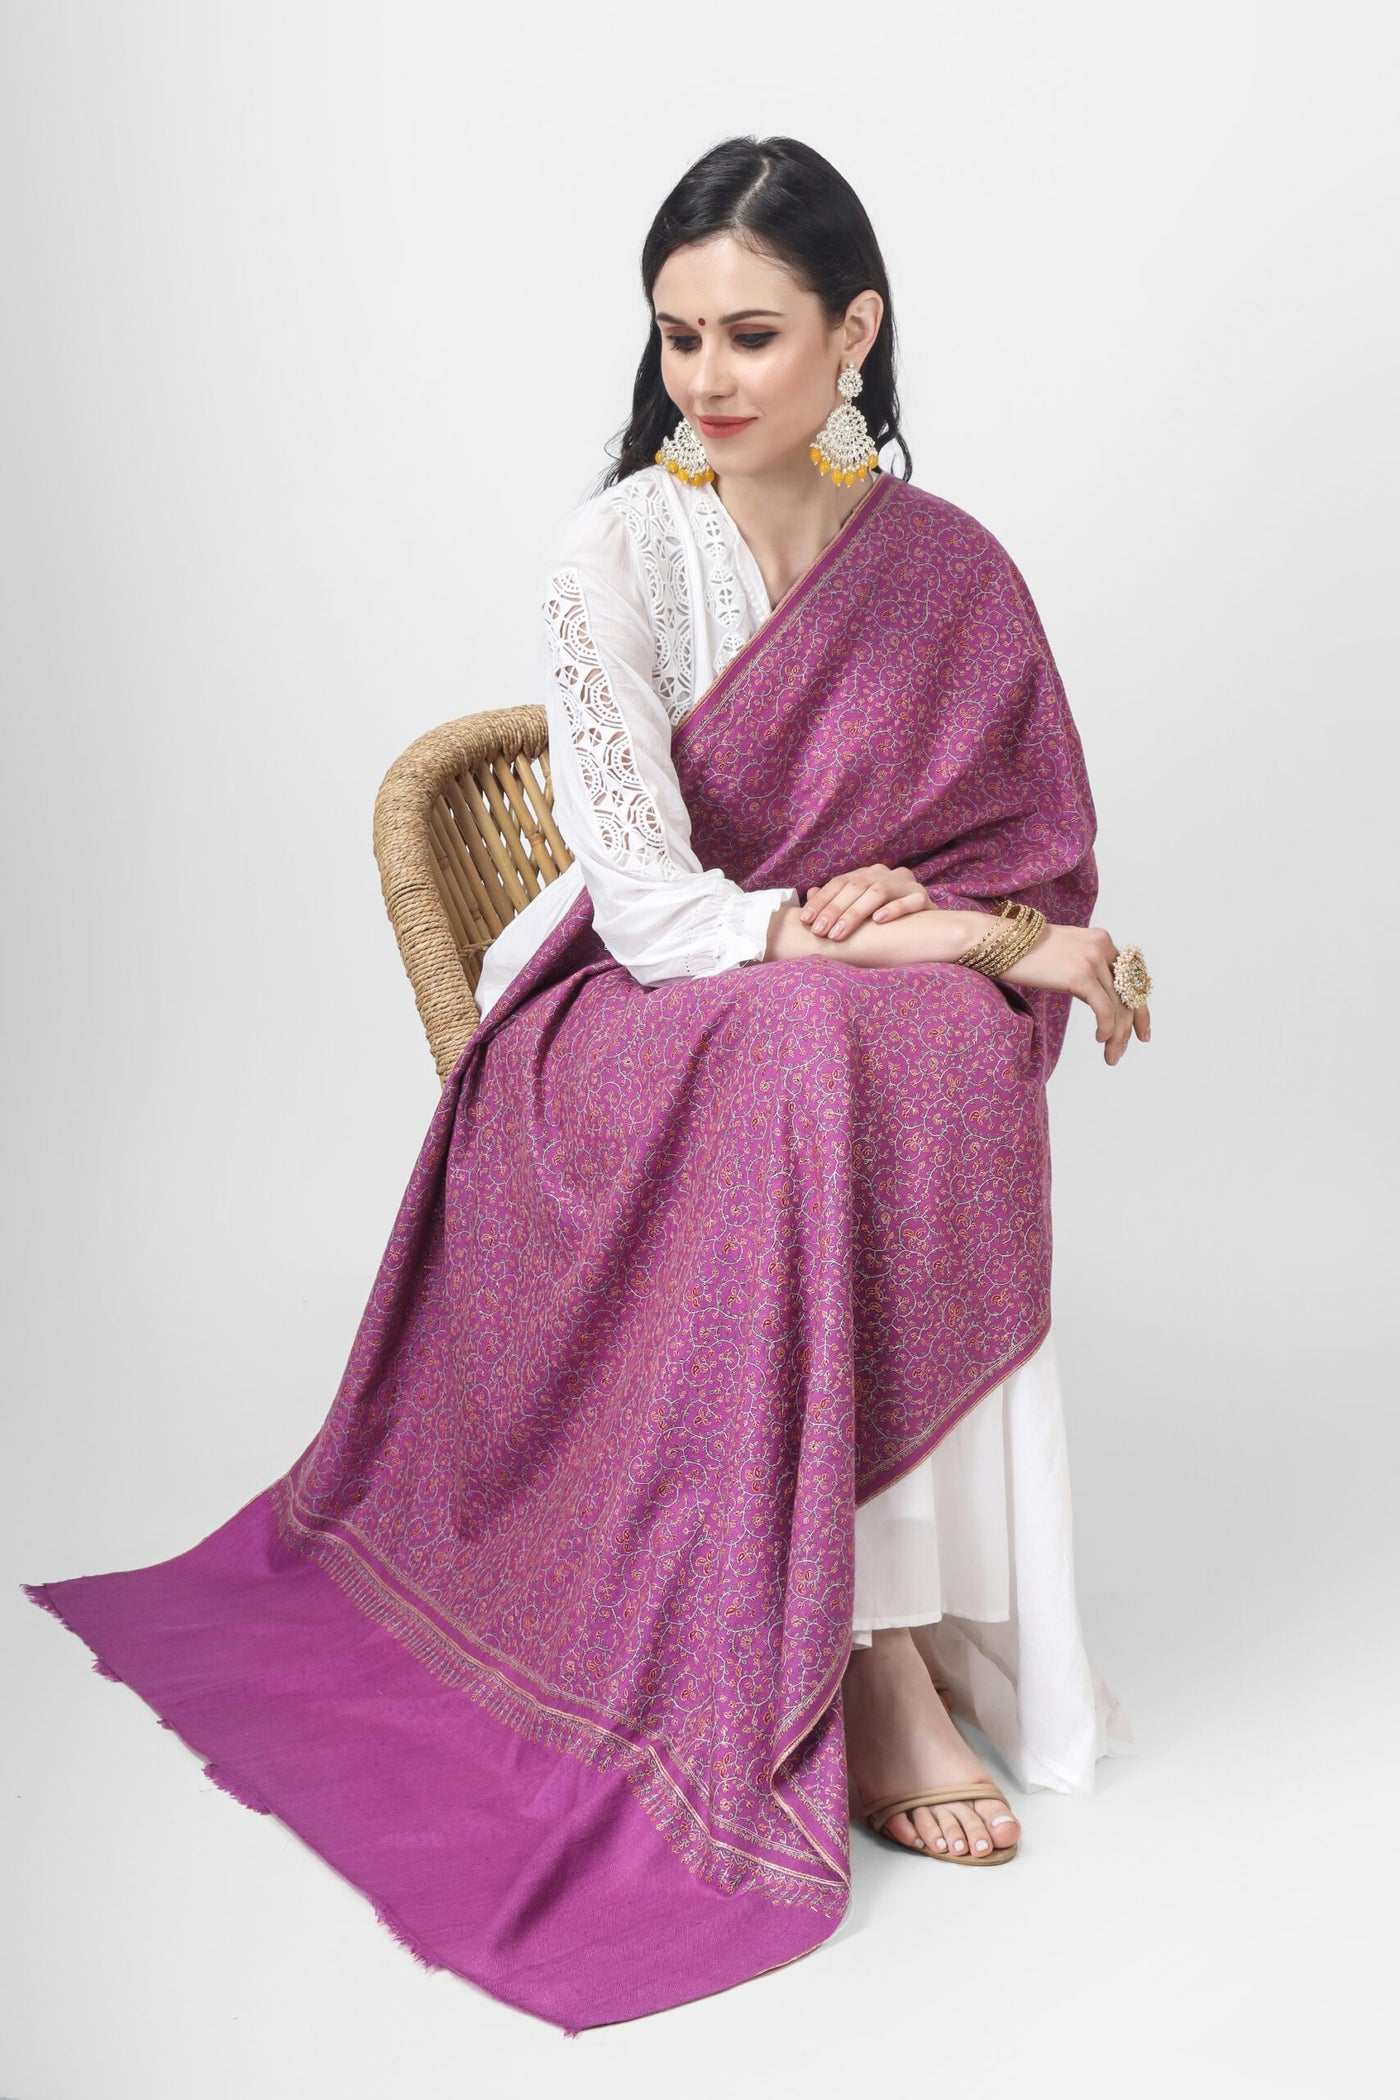 KUWAIT - This elegant White Pashmina Jaldaar With Fuchsia pink needlepoint Embroidered Shawl is decorated with deft needlework embroidery in a gorgeous Jaldaar pattern, making it a sumptuous and fashionable addition to any event.